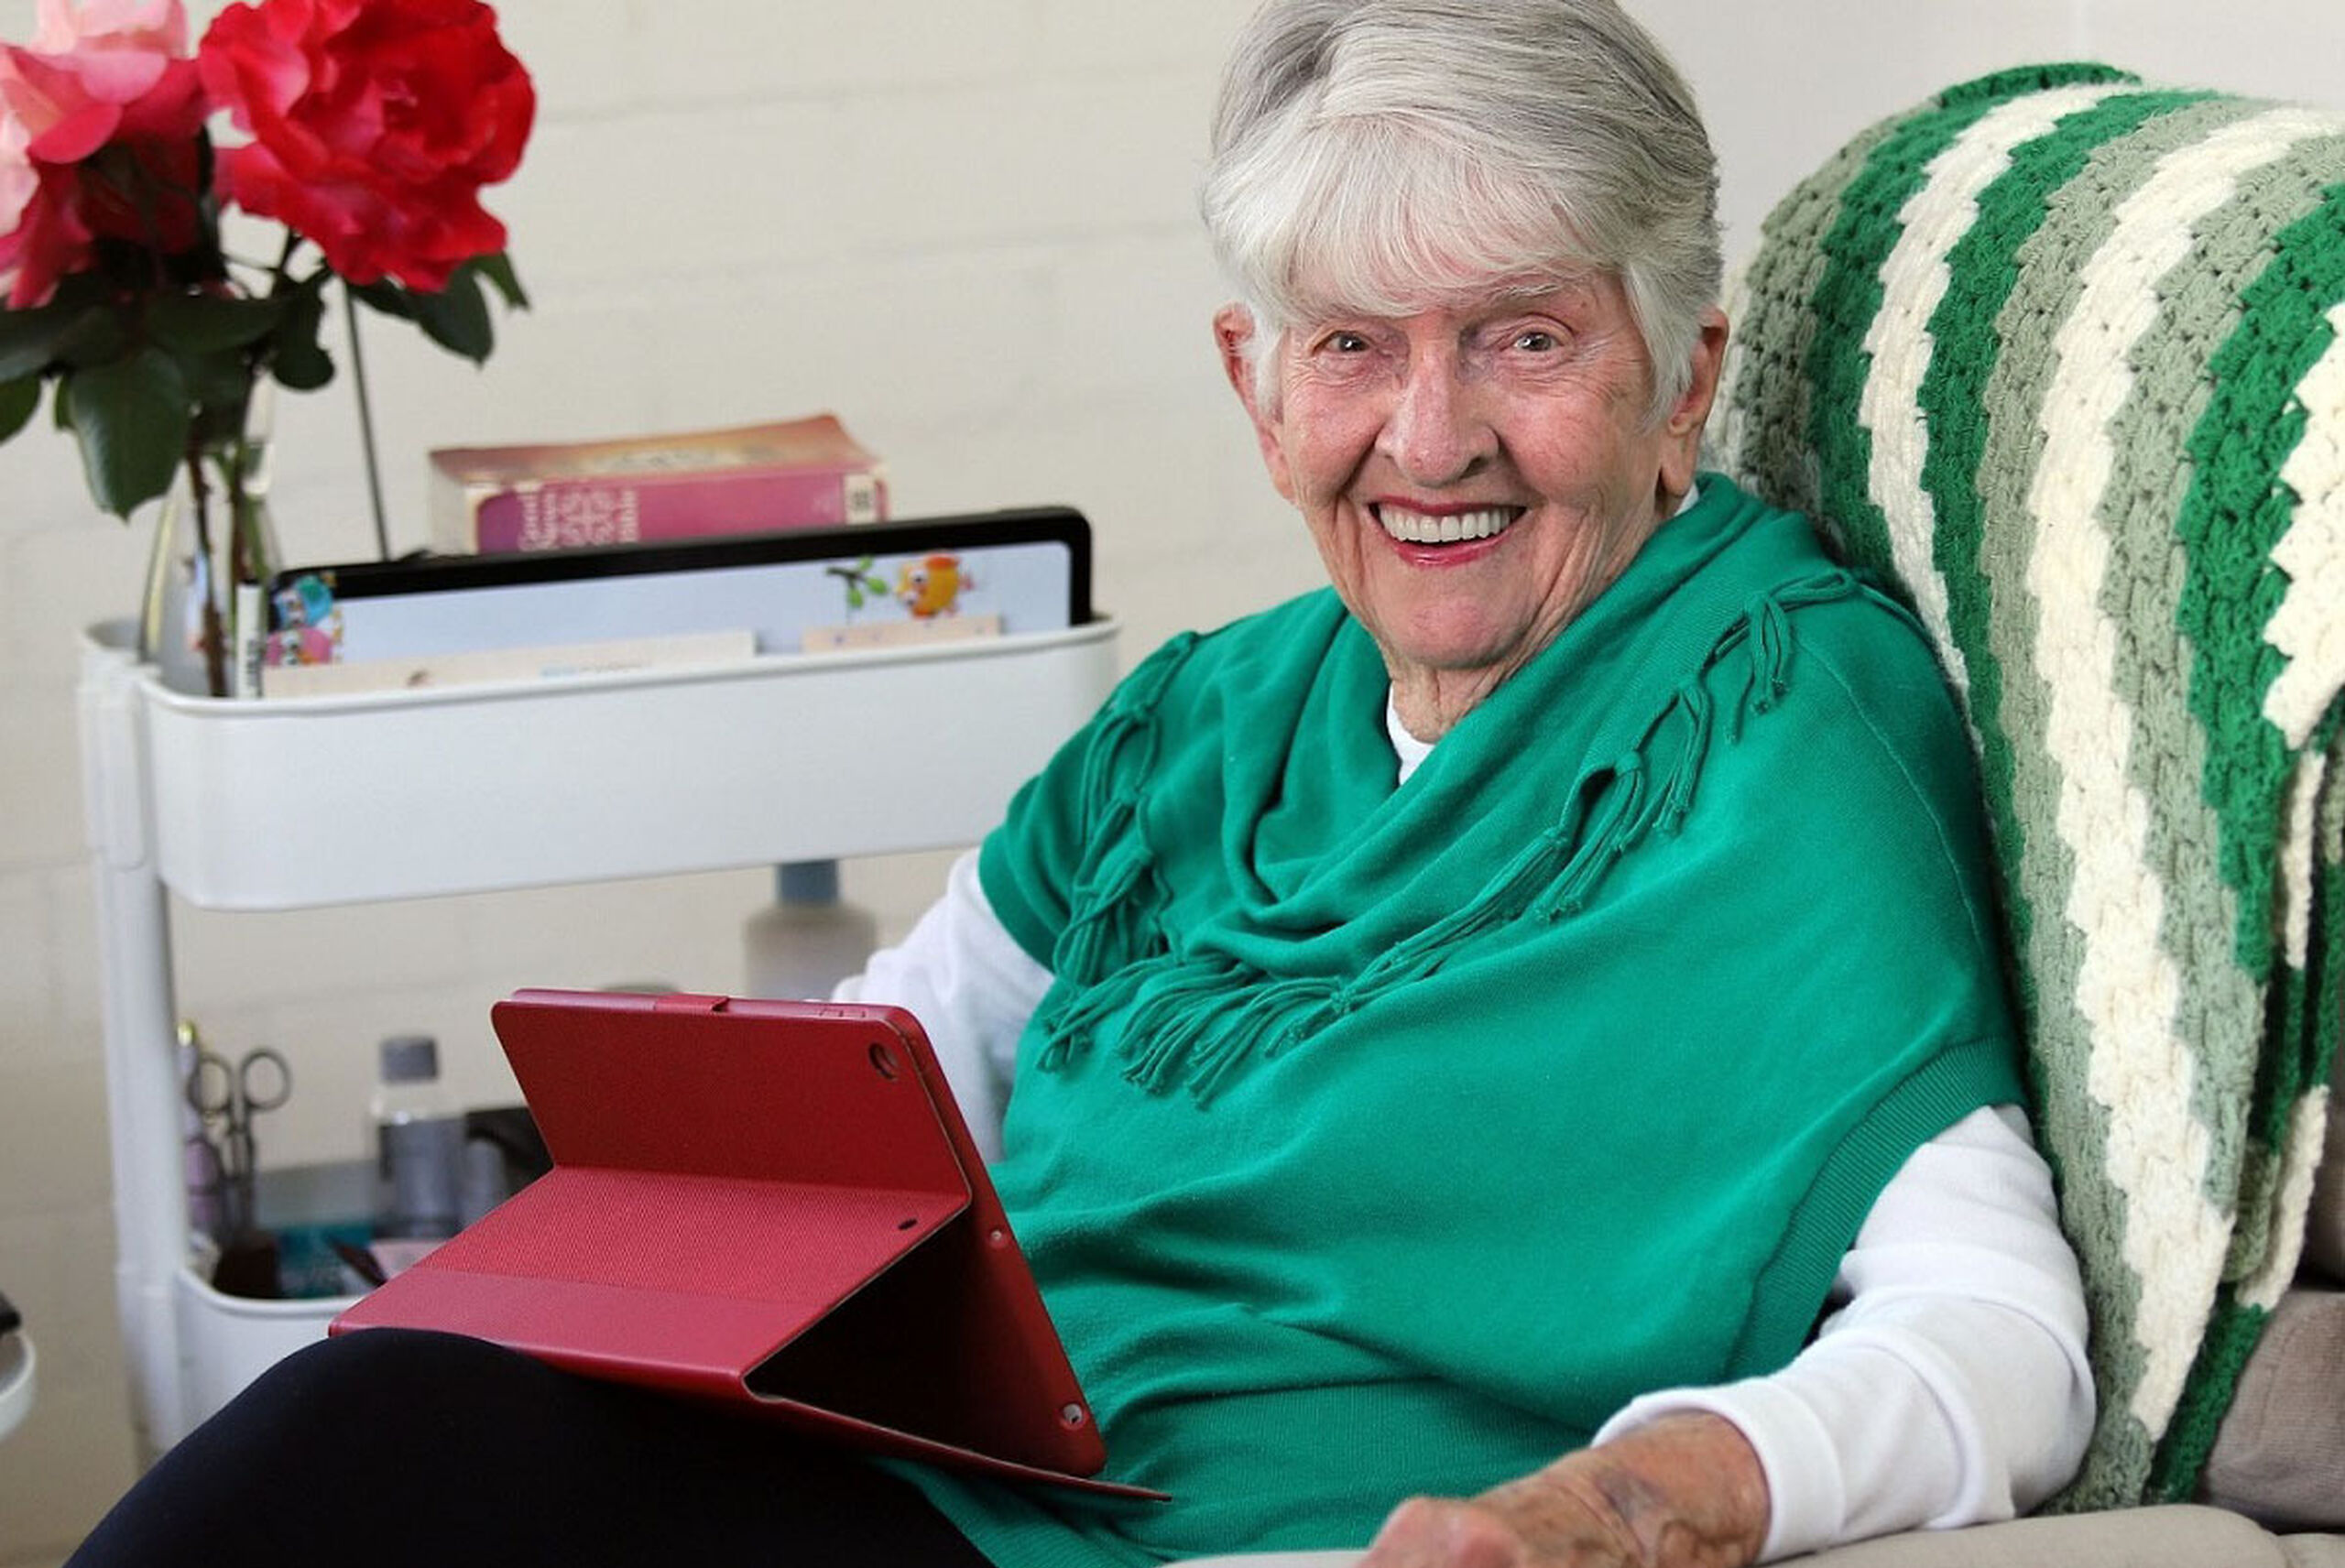 Baptist Care home care helps 90 year old Marie stay busy